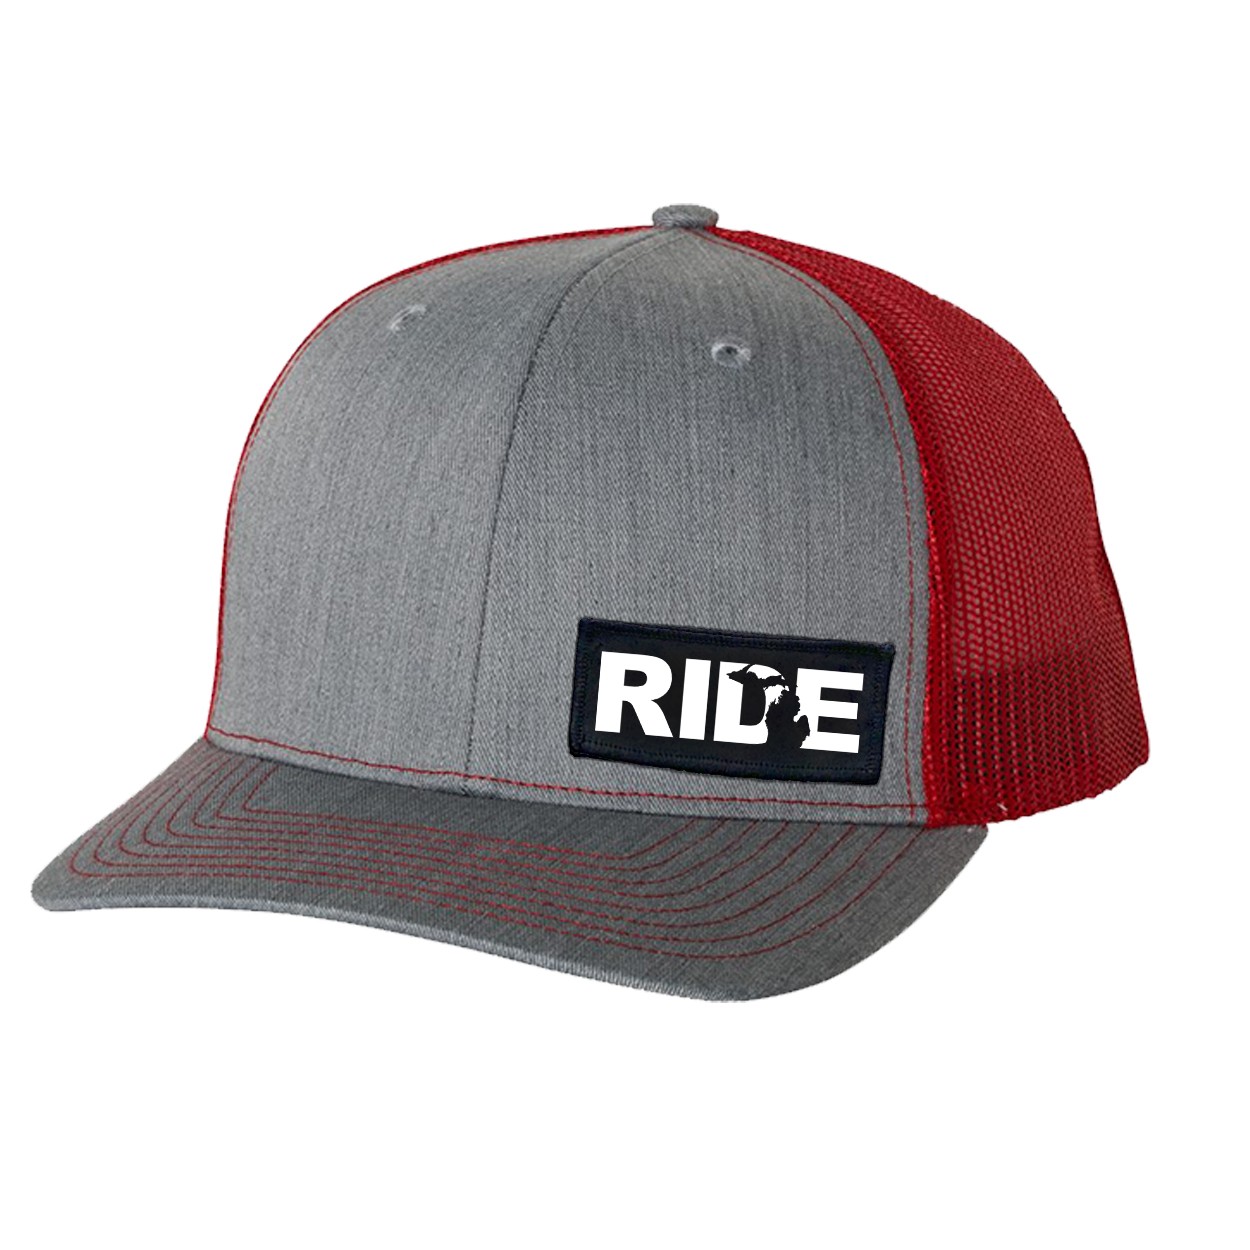 Ride Michigan Night Out Woven Patch Snapback Trucker Hat Heather Heather Grey/Red (White Logo)